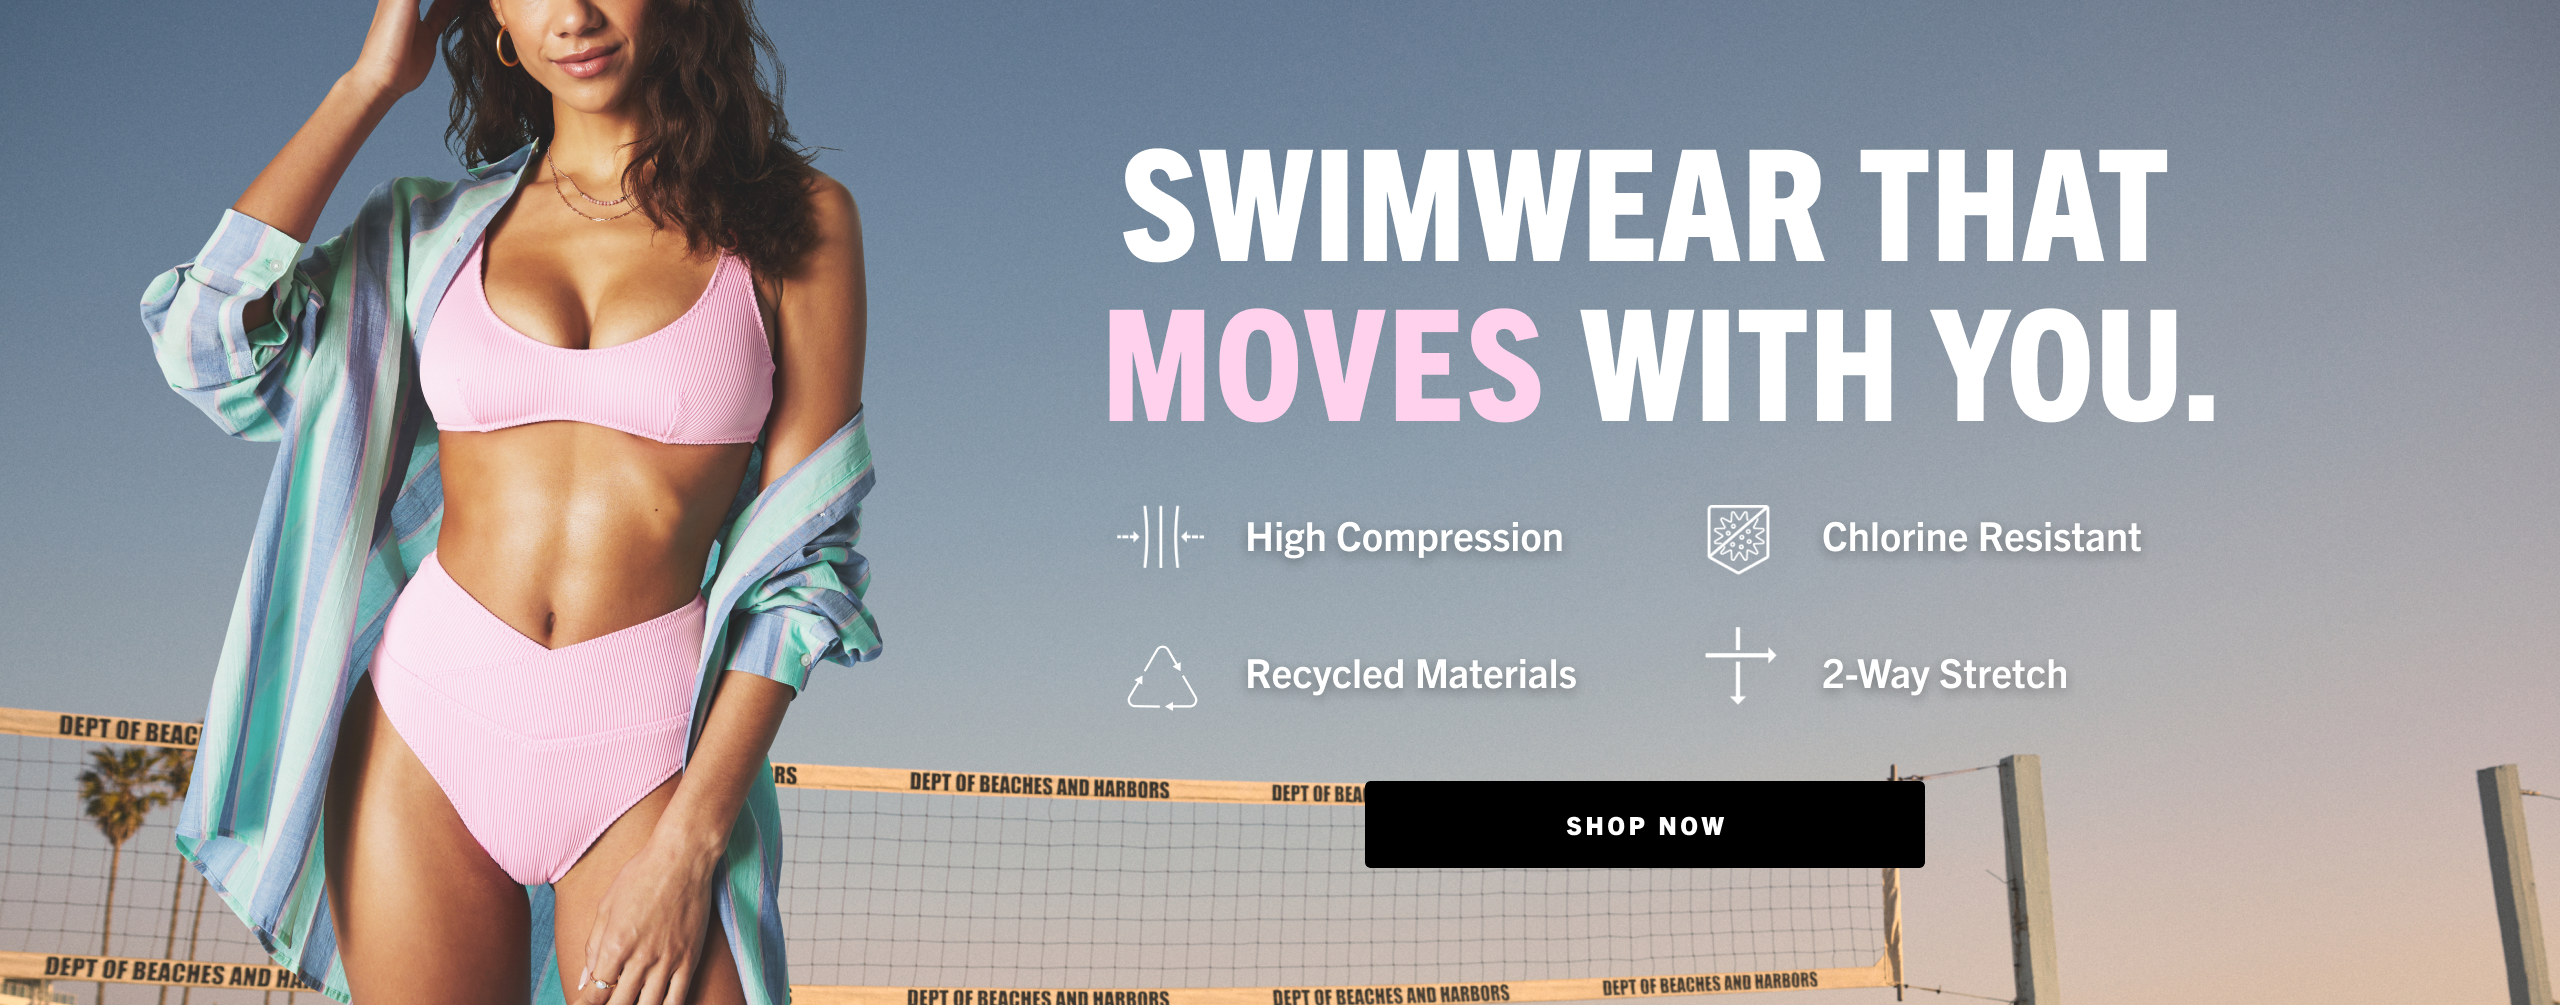 Swimwear that moves with you featuring high compression, chlorine resistant fabric, eco-friendly, and 2-way stretch. take our style quiz to shop.